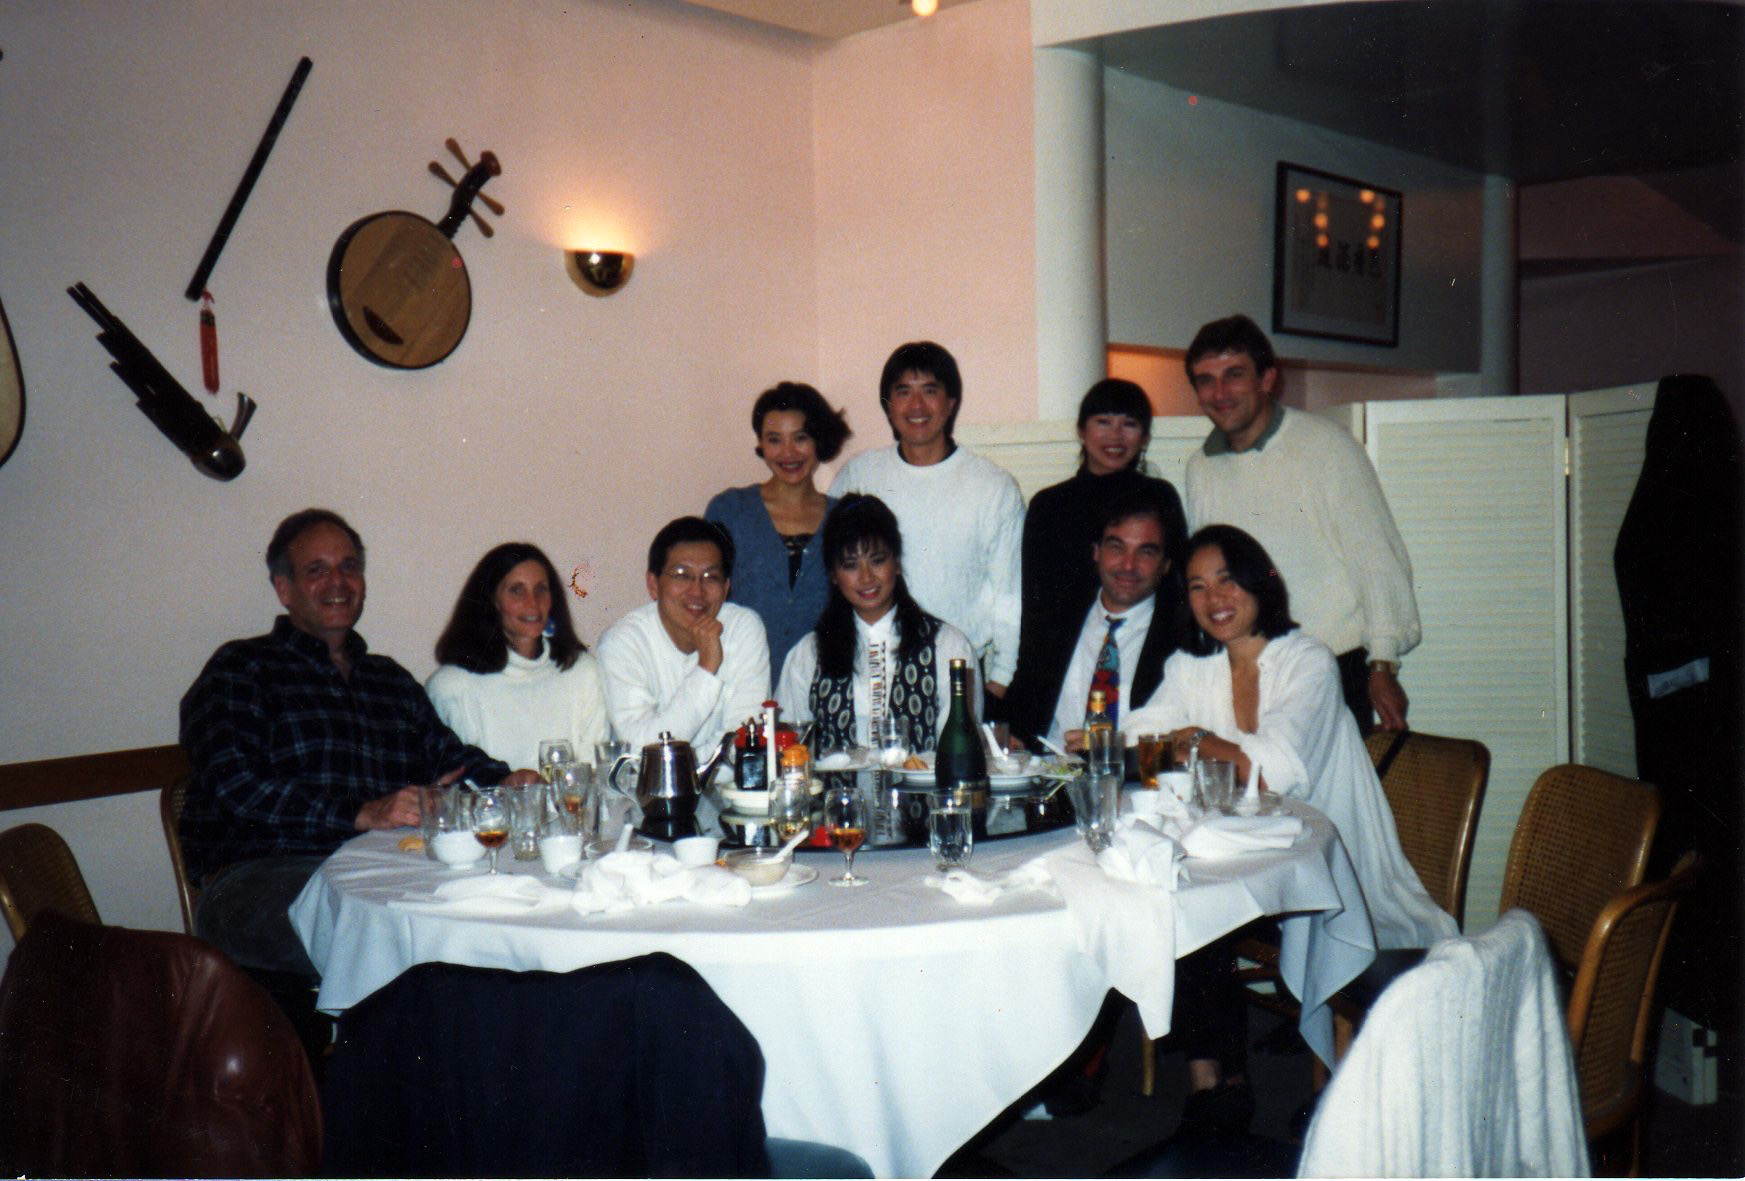 PHOTO: Janet Yang, seated on the far right, is pictured at a celebratory dinner in San Francisco with Oliver Stone, Amy Tan and Joan Chen among others.